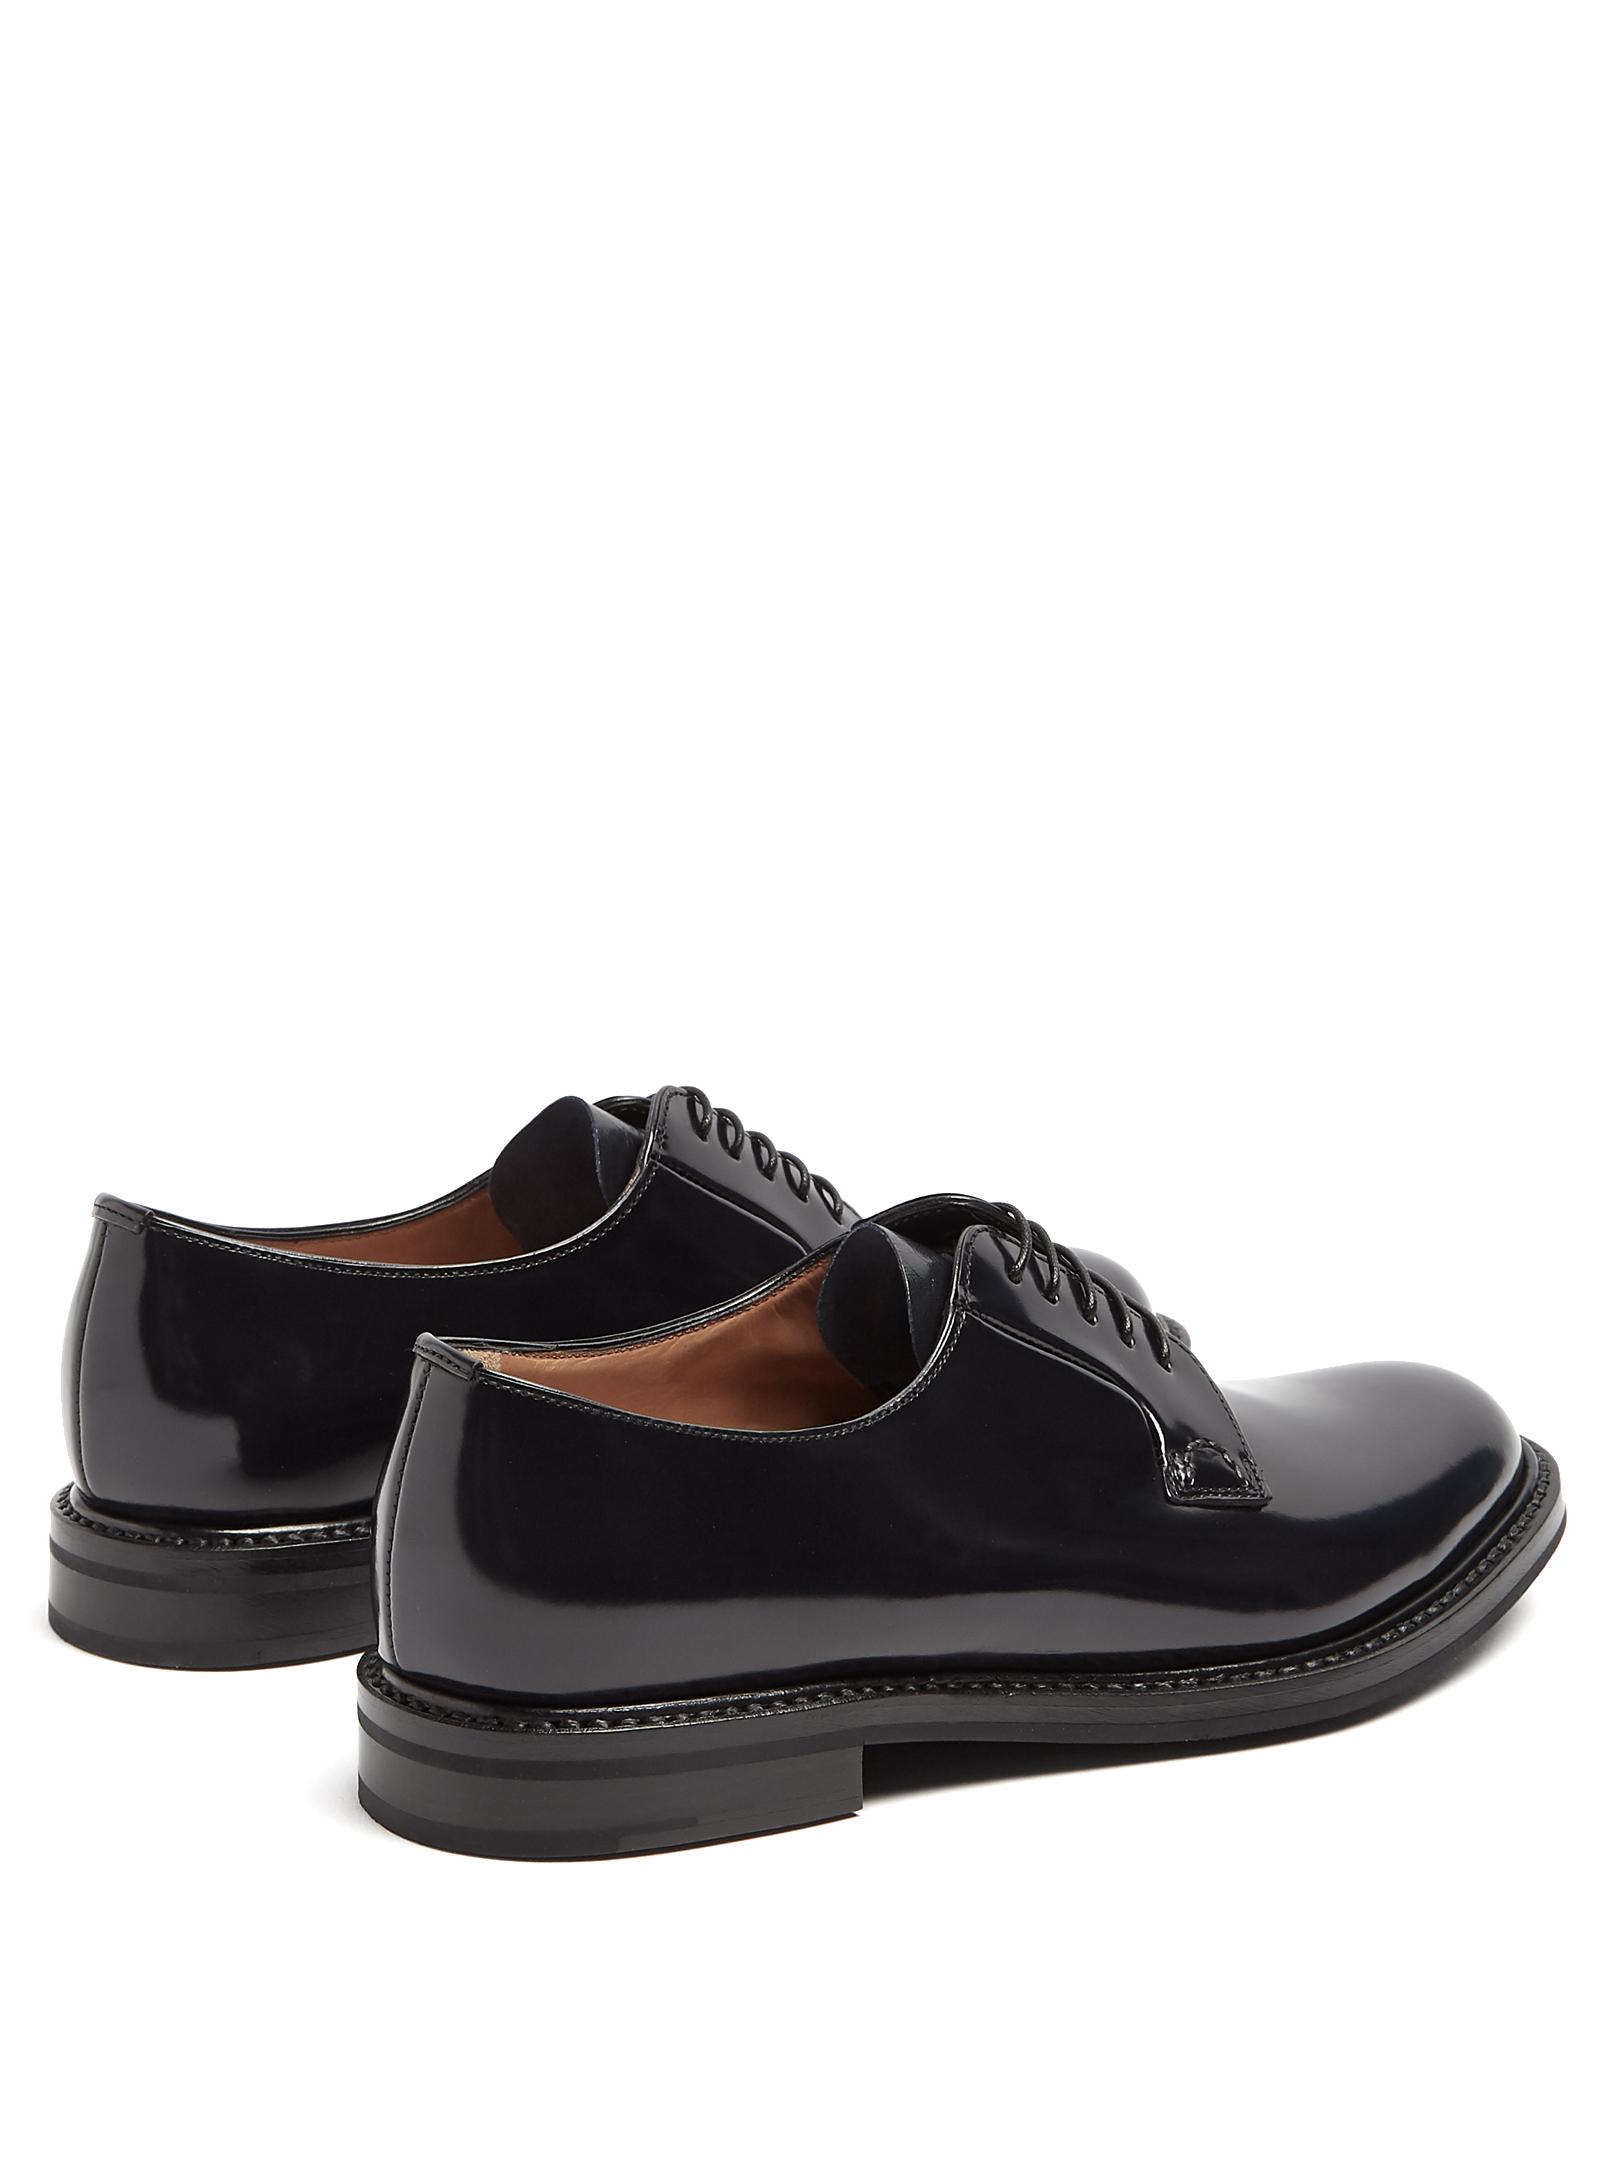 Church's Shannon 2 Leather Derby Shoes in Navy (Blue) - Lyst